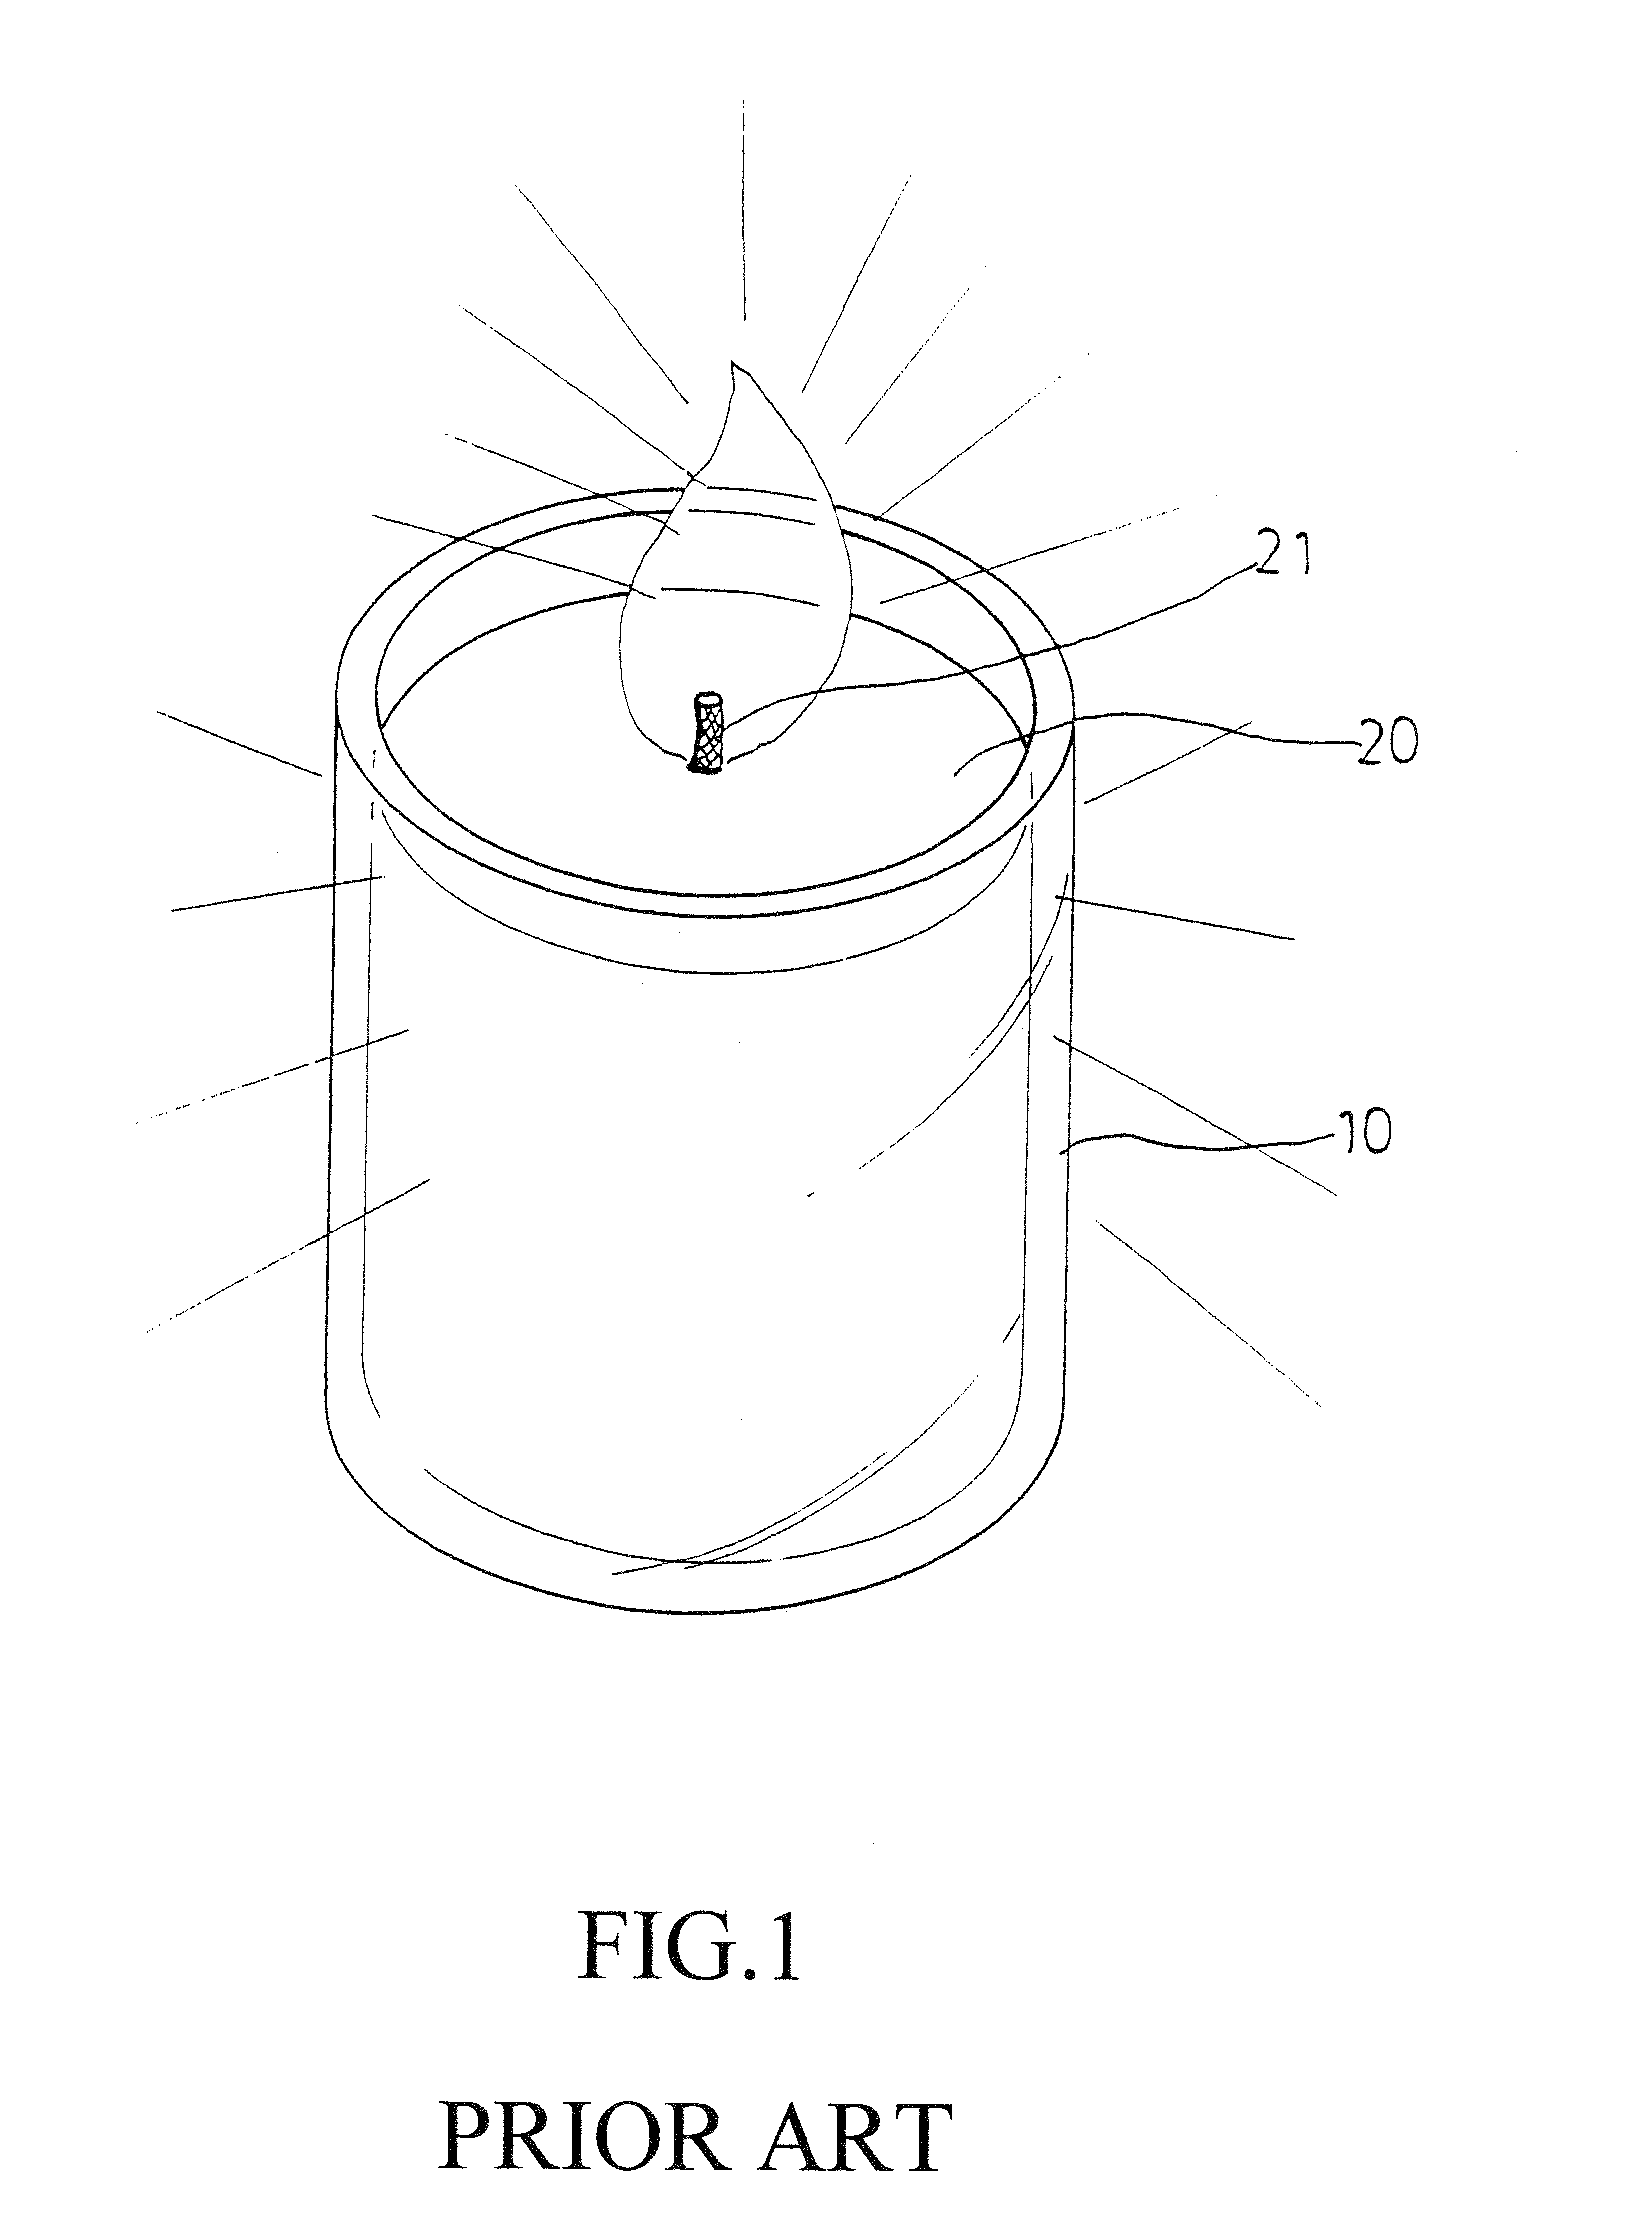 Structure of candle holder